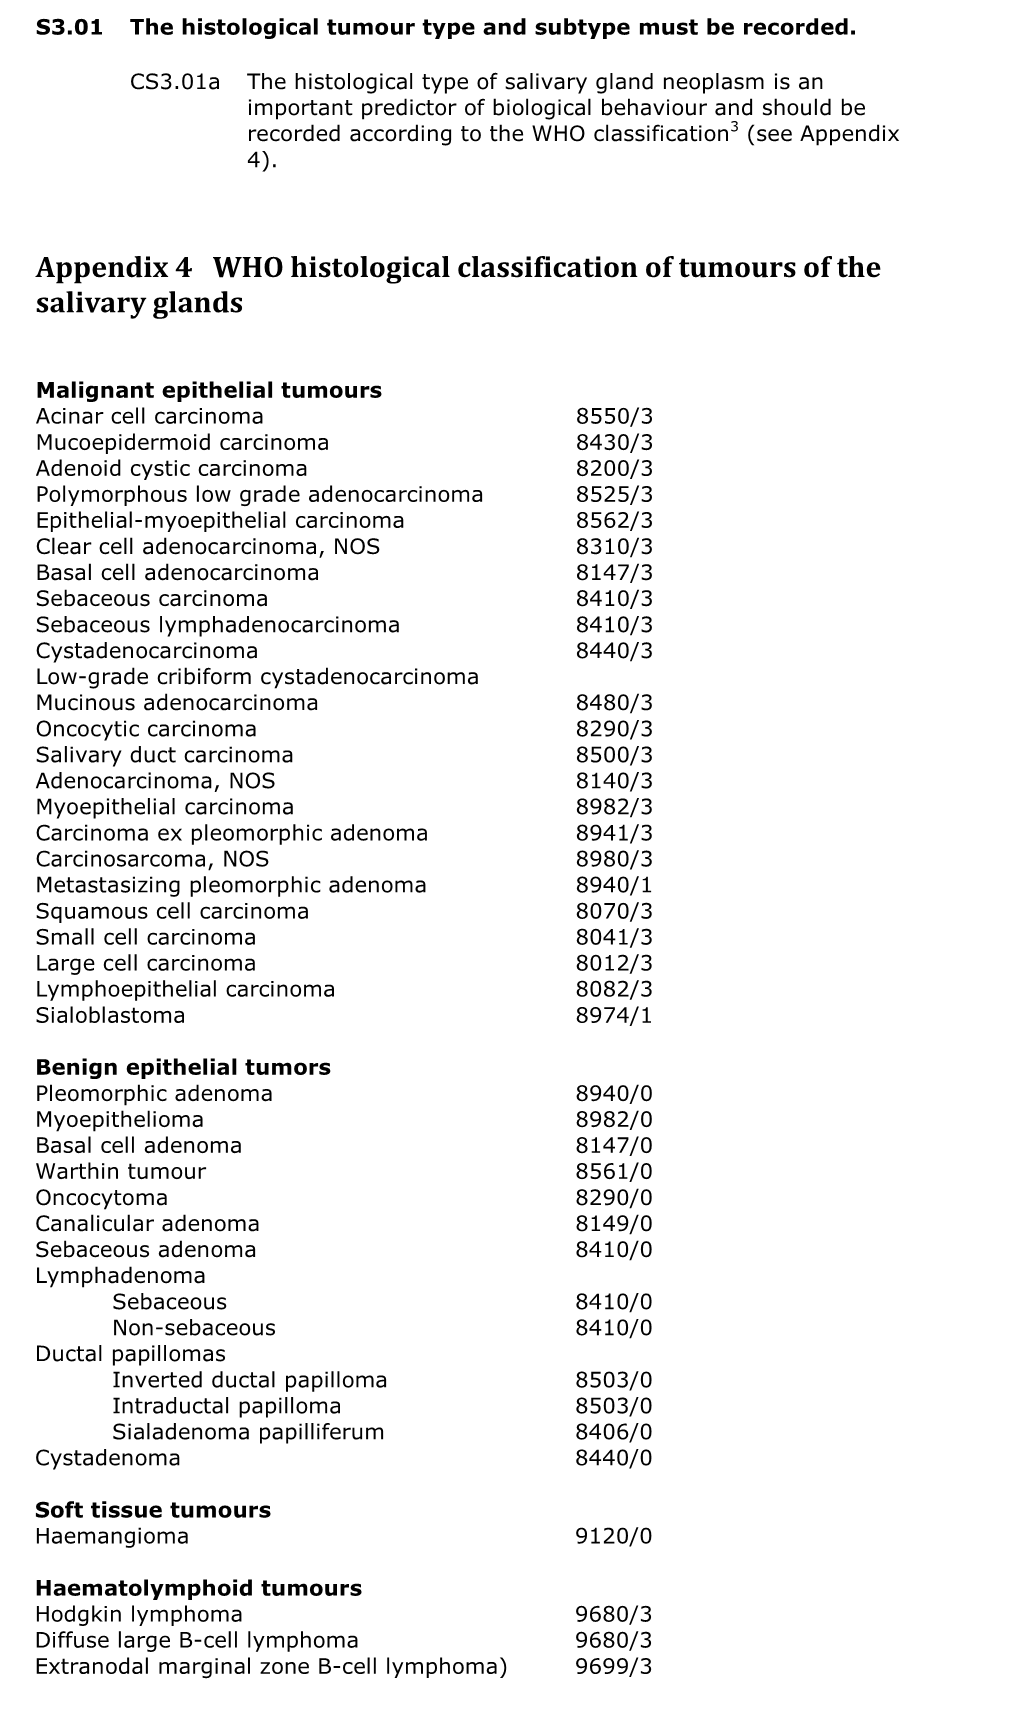 Appendix 4 WHO Histological Classification of Tumours of the Salivary Glands